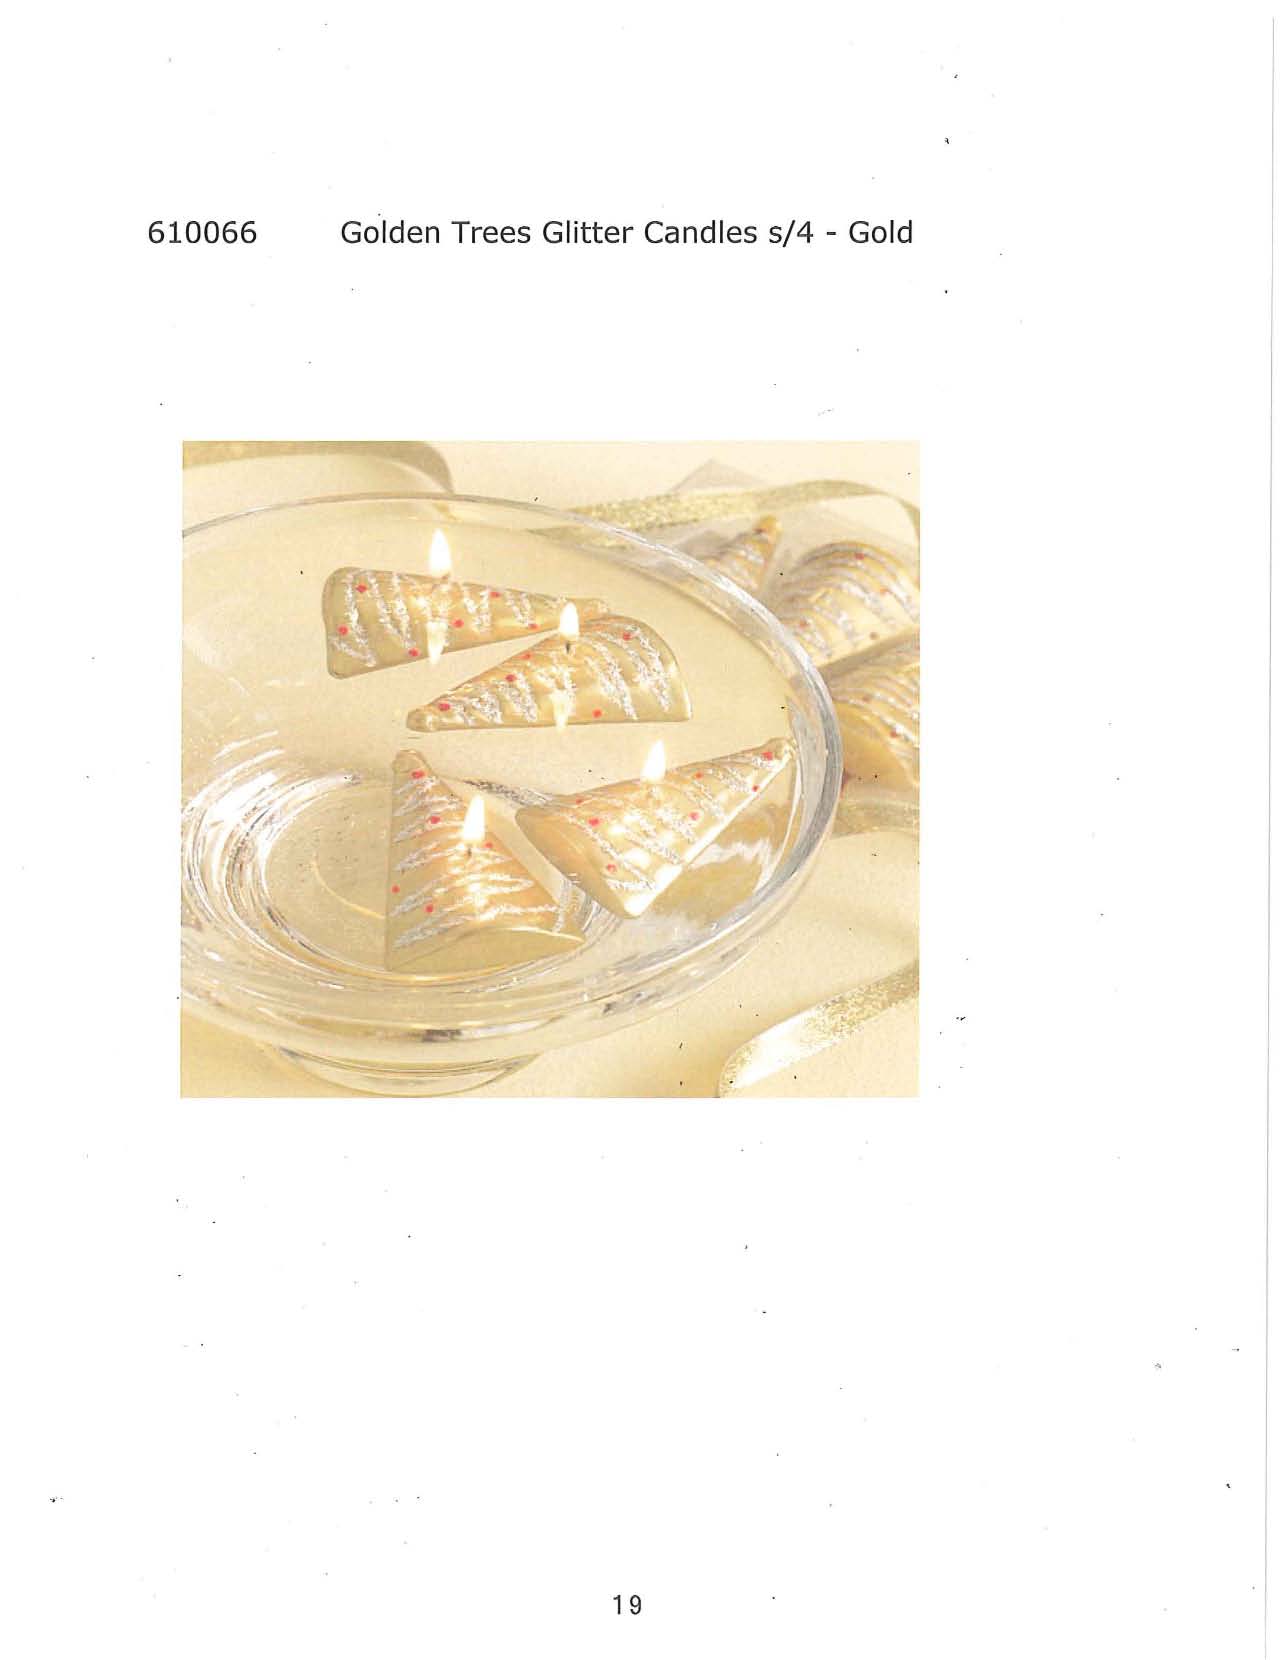 Golden Trees Glitter Candle s/4 - Gold